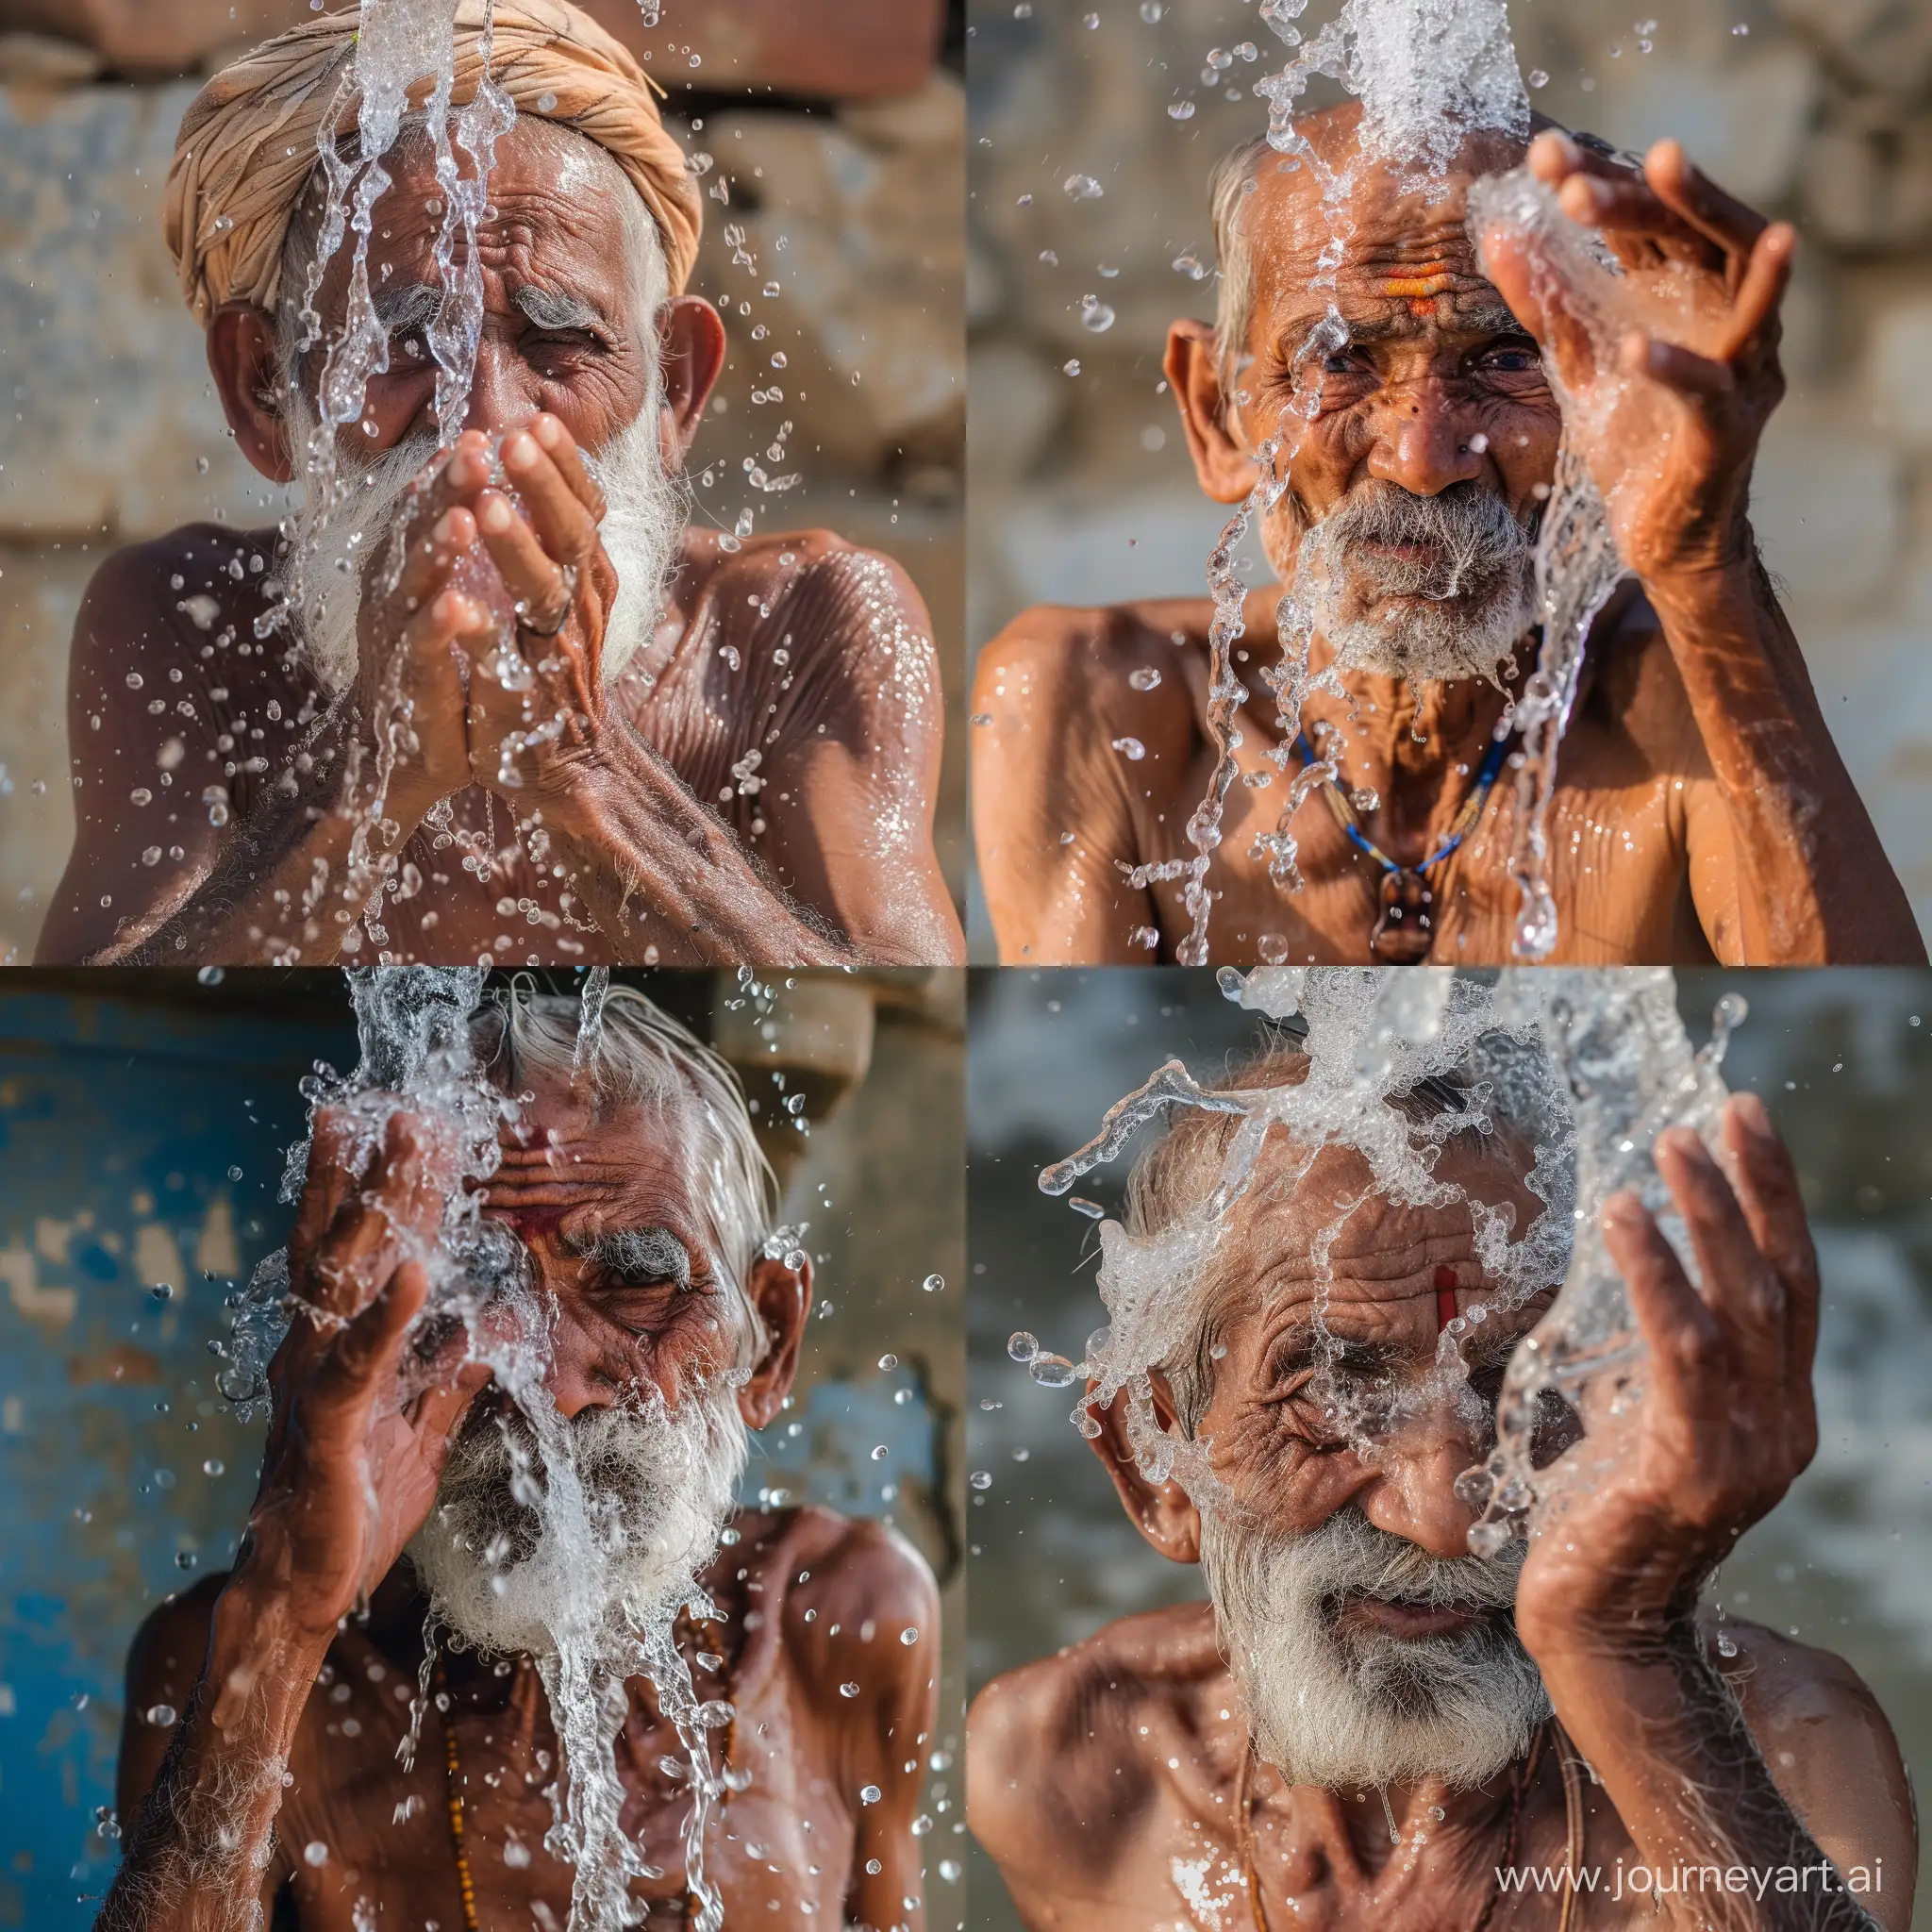 Elderly-Man-in-Rajasthan-India-Refreshingly-Splashes-Water-Realistic-Portrait-with-Fujifilm-XT5-50mm-Lens